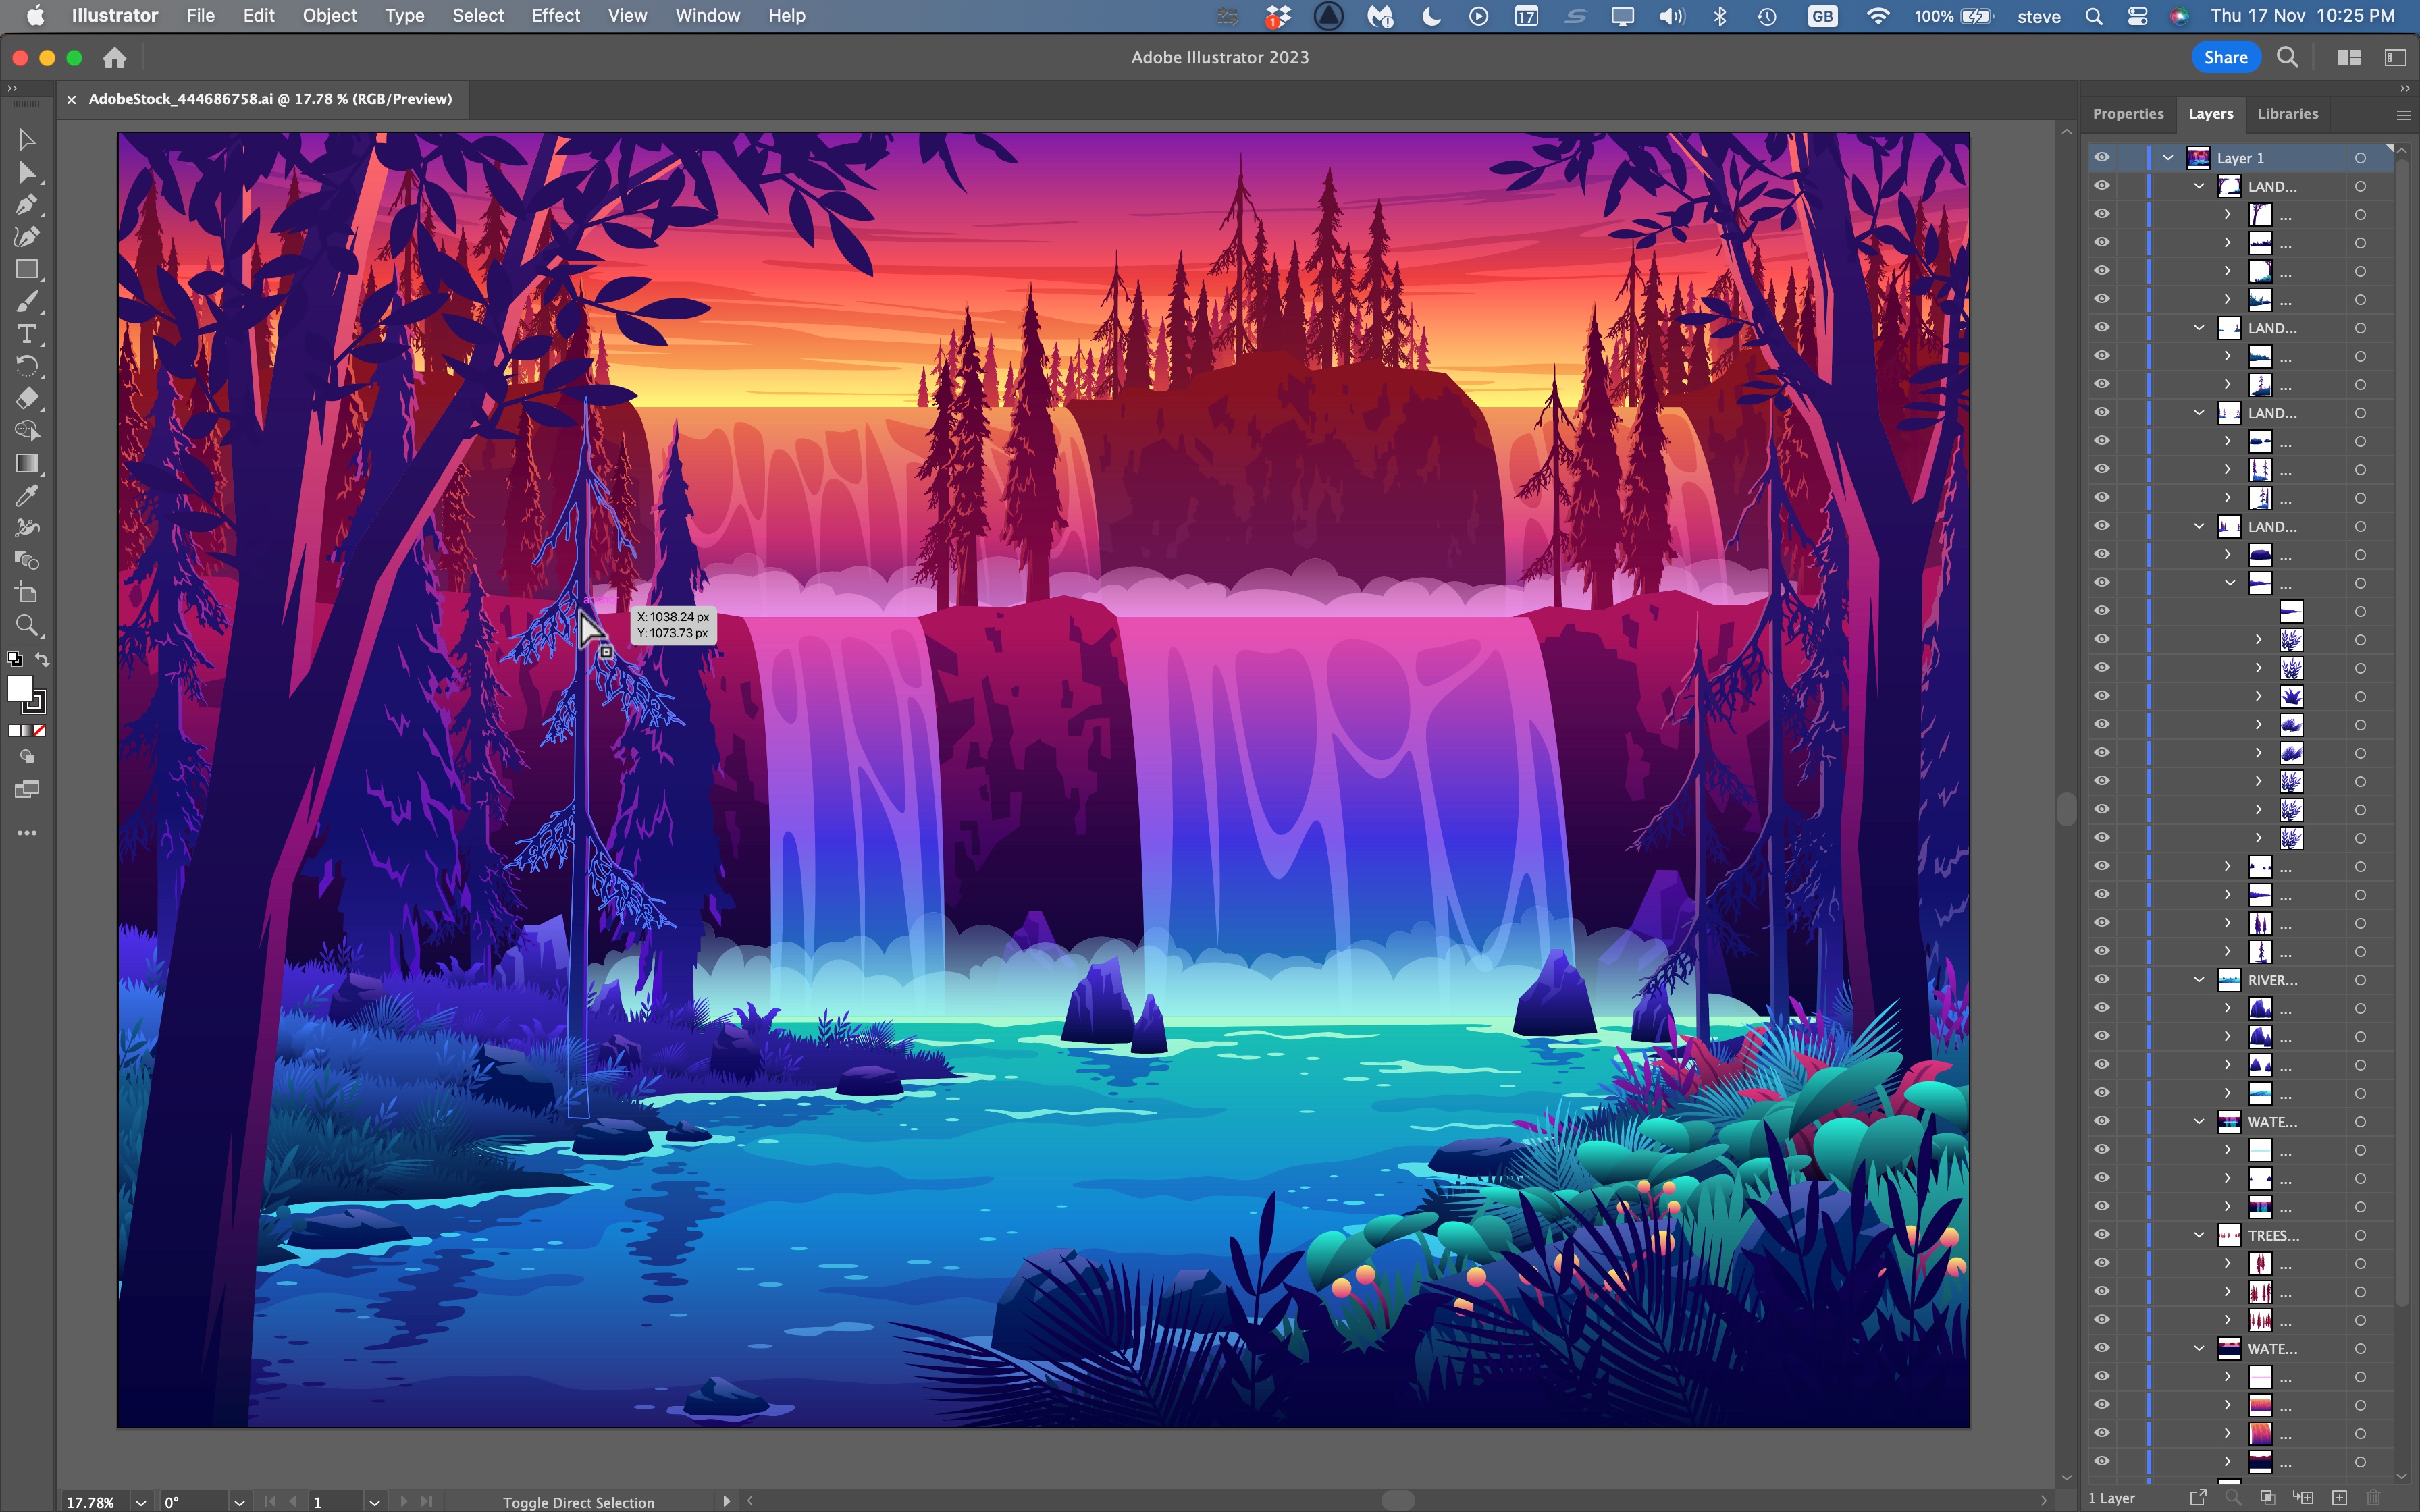 The latest version of Adobe Illustrator brings some great tools to an already powerful program